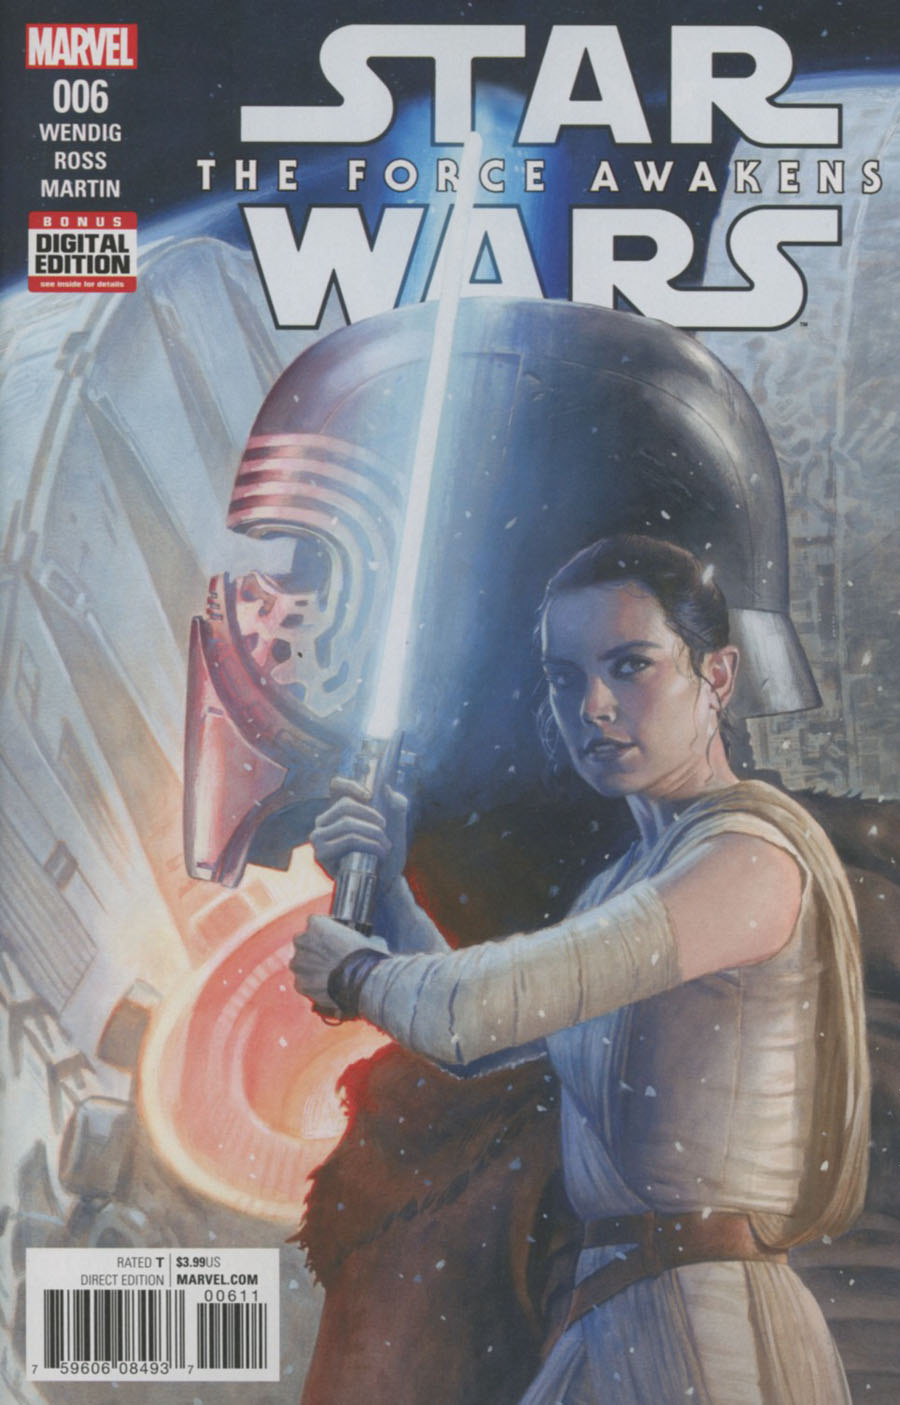 Star Wars Episode VII The Force Awakens Adaptation #6 Cover A Regular Paolo Rivera Cover